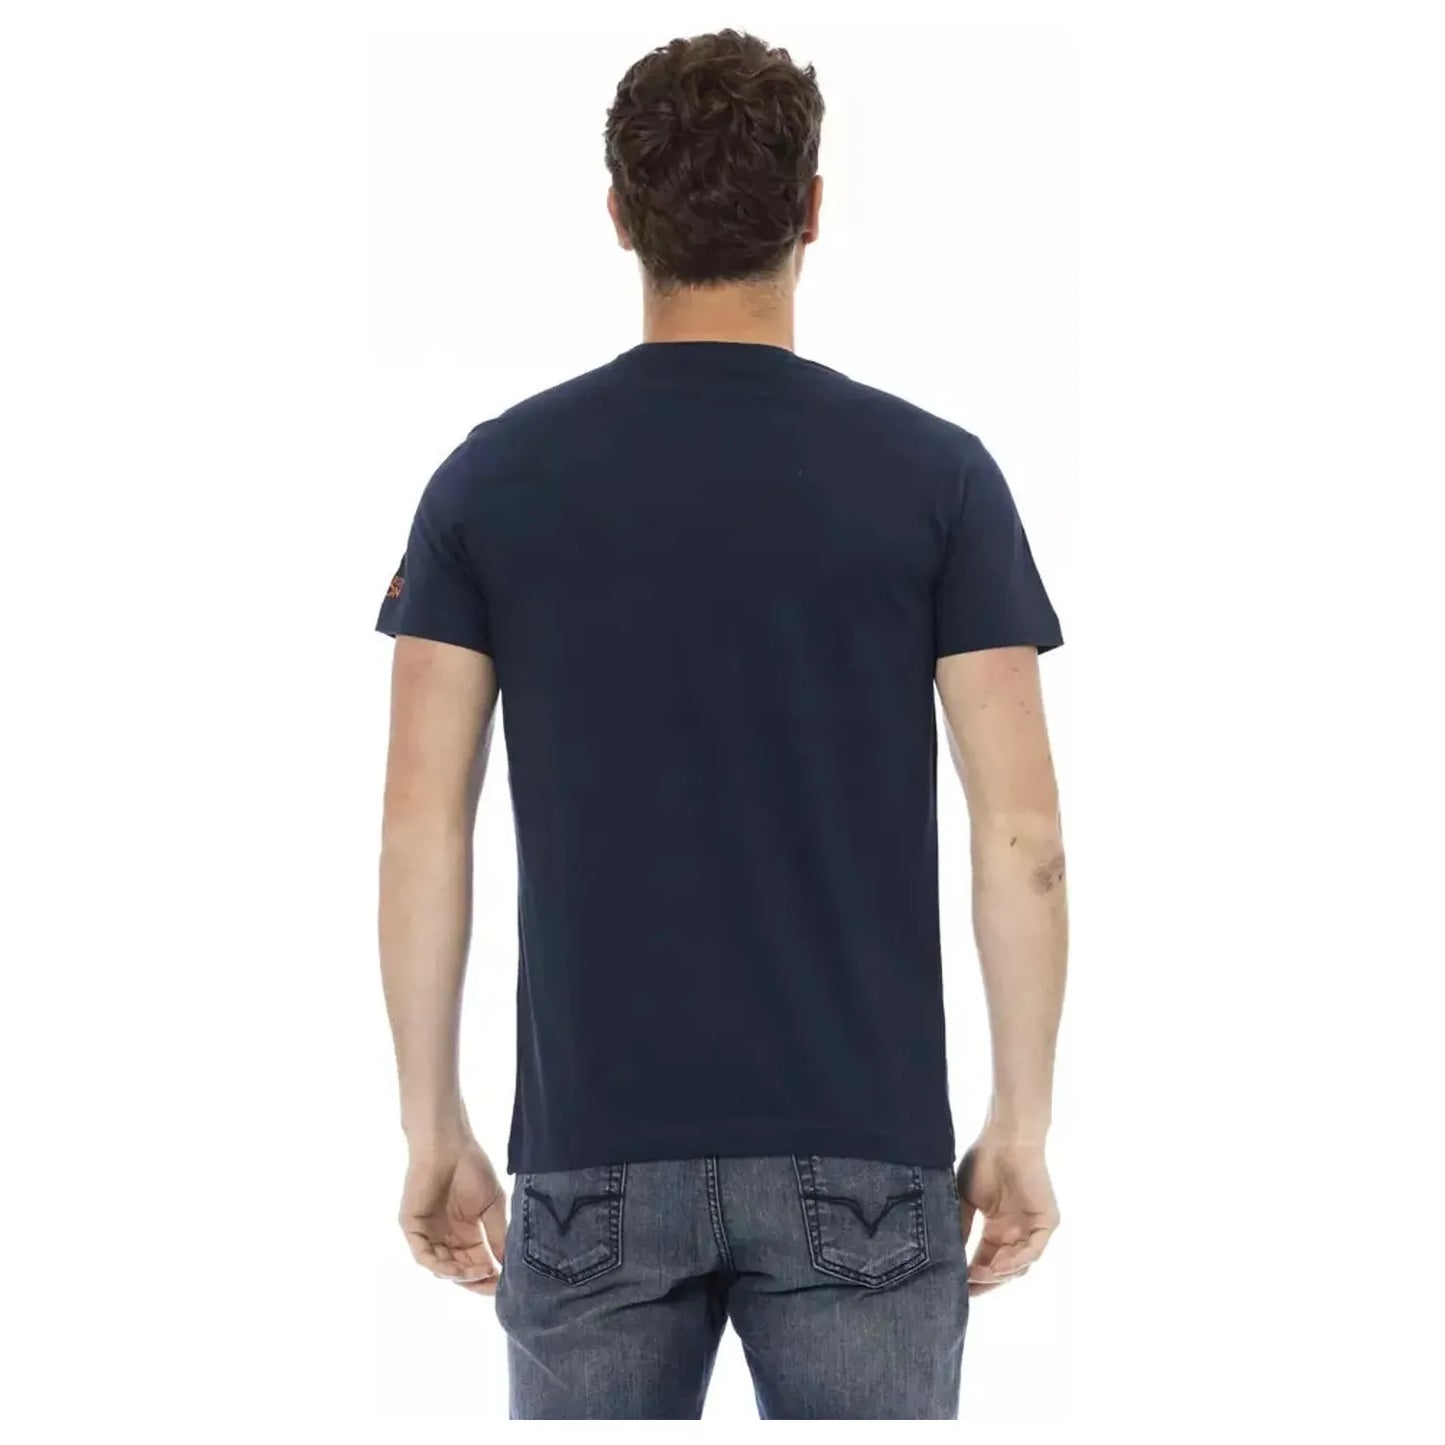 Trussardi Action Chic Blue Short Sleeve Tee with Front Print blue-cotton-t-shirt-100